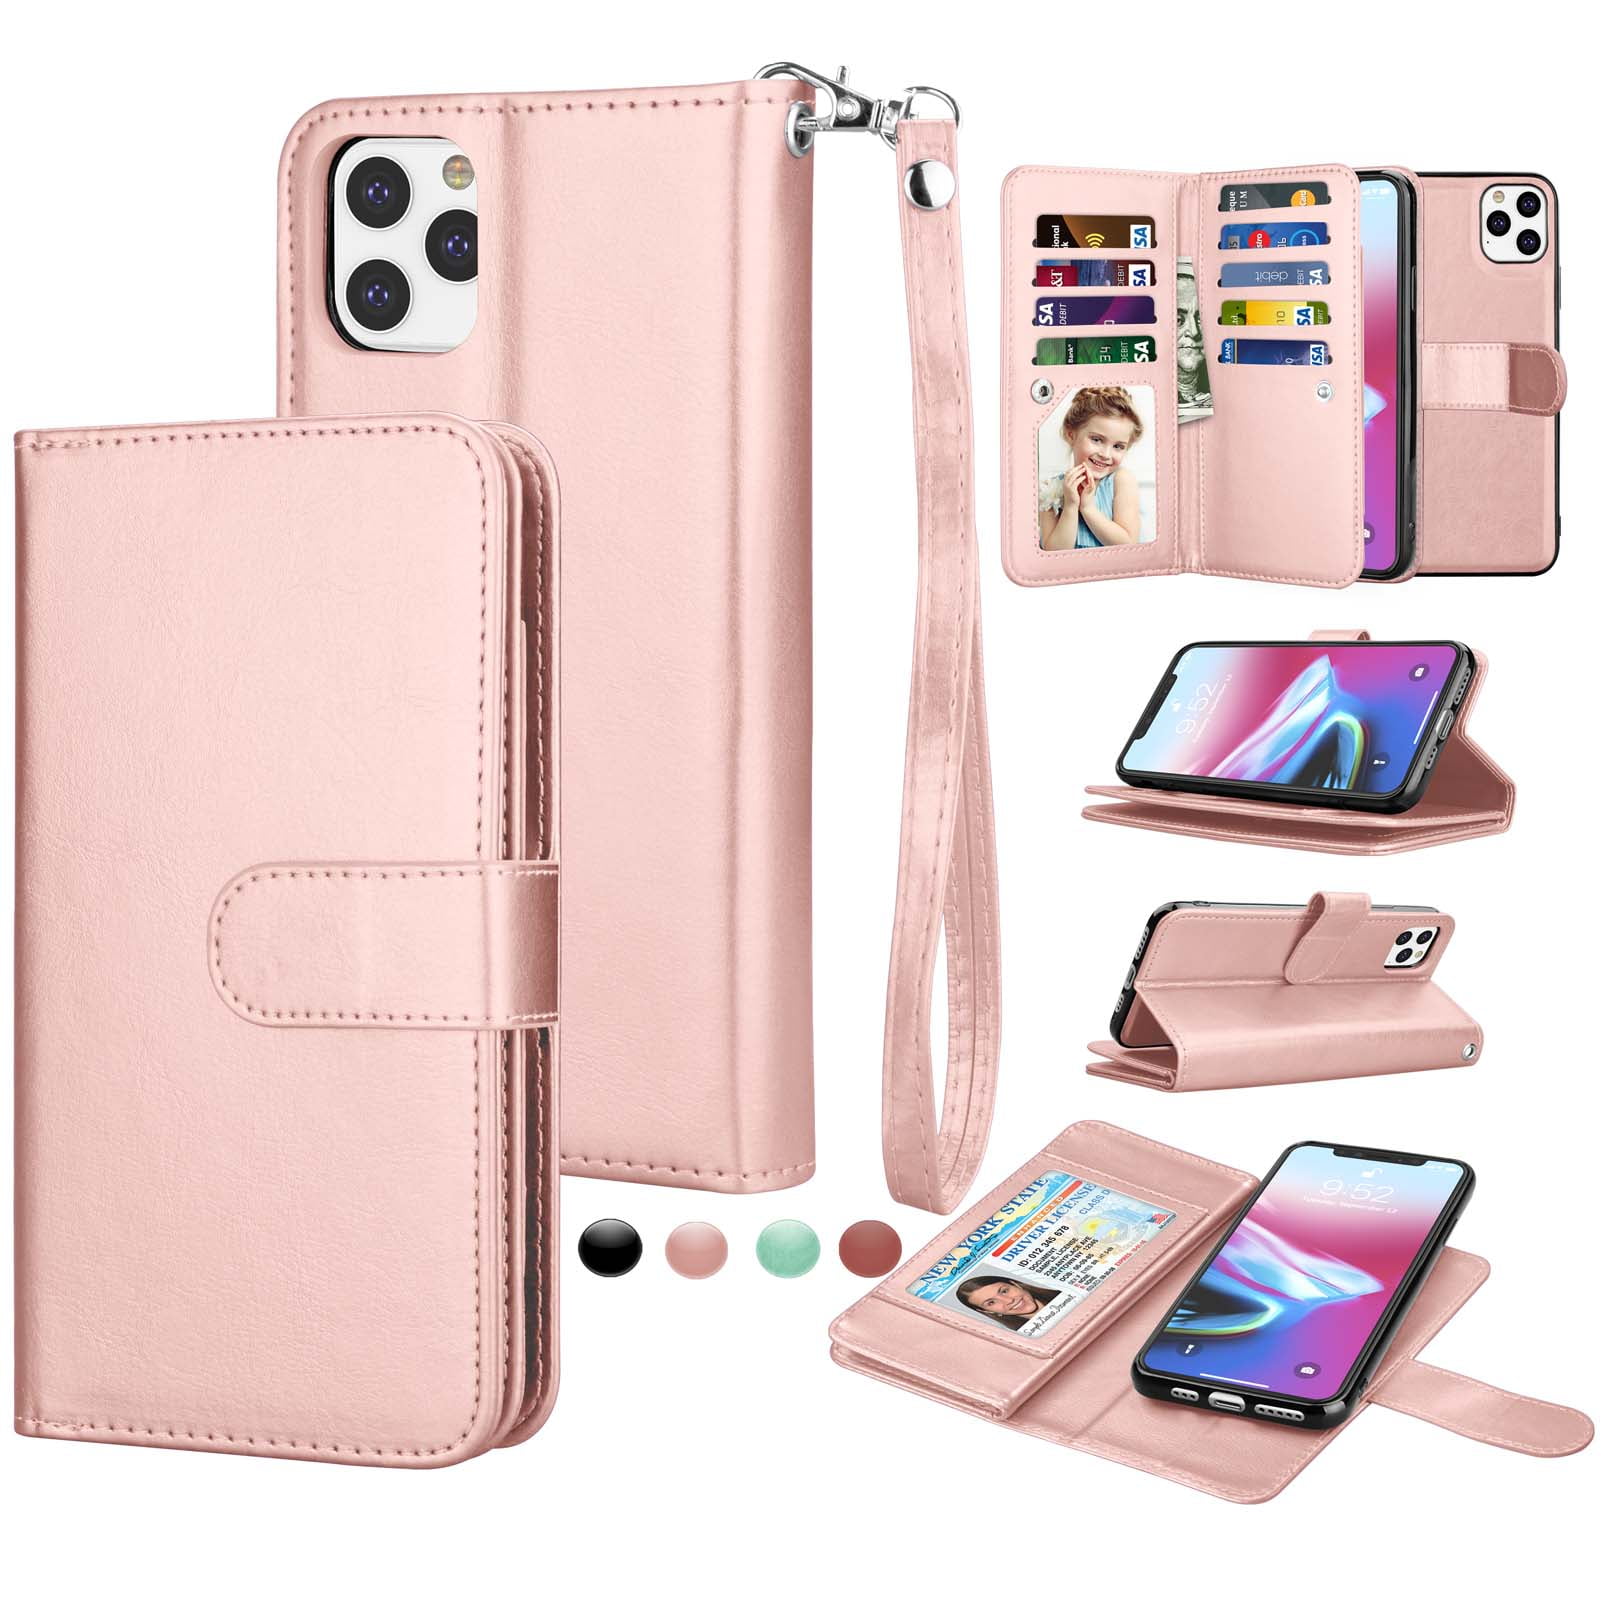 MMHUO for iPhone 11 Case Elegant Flower Magnetic Flip Leather Wallet Case for iPhone 11 with Card Holder for Women Girls Durable Shockproof Protective Phone Cases for iPhone 11 6.1 inch Rose Gold